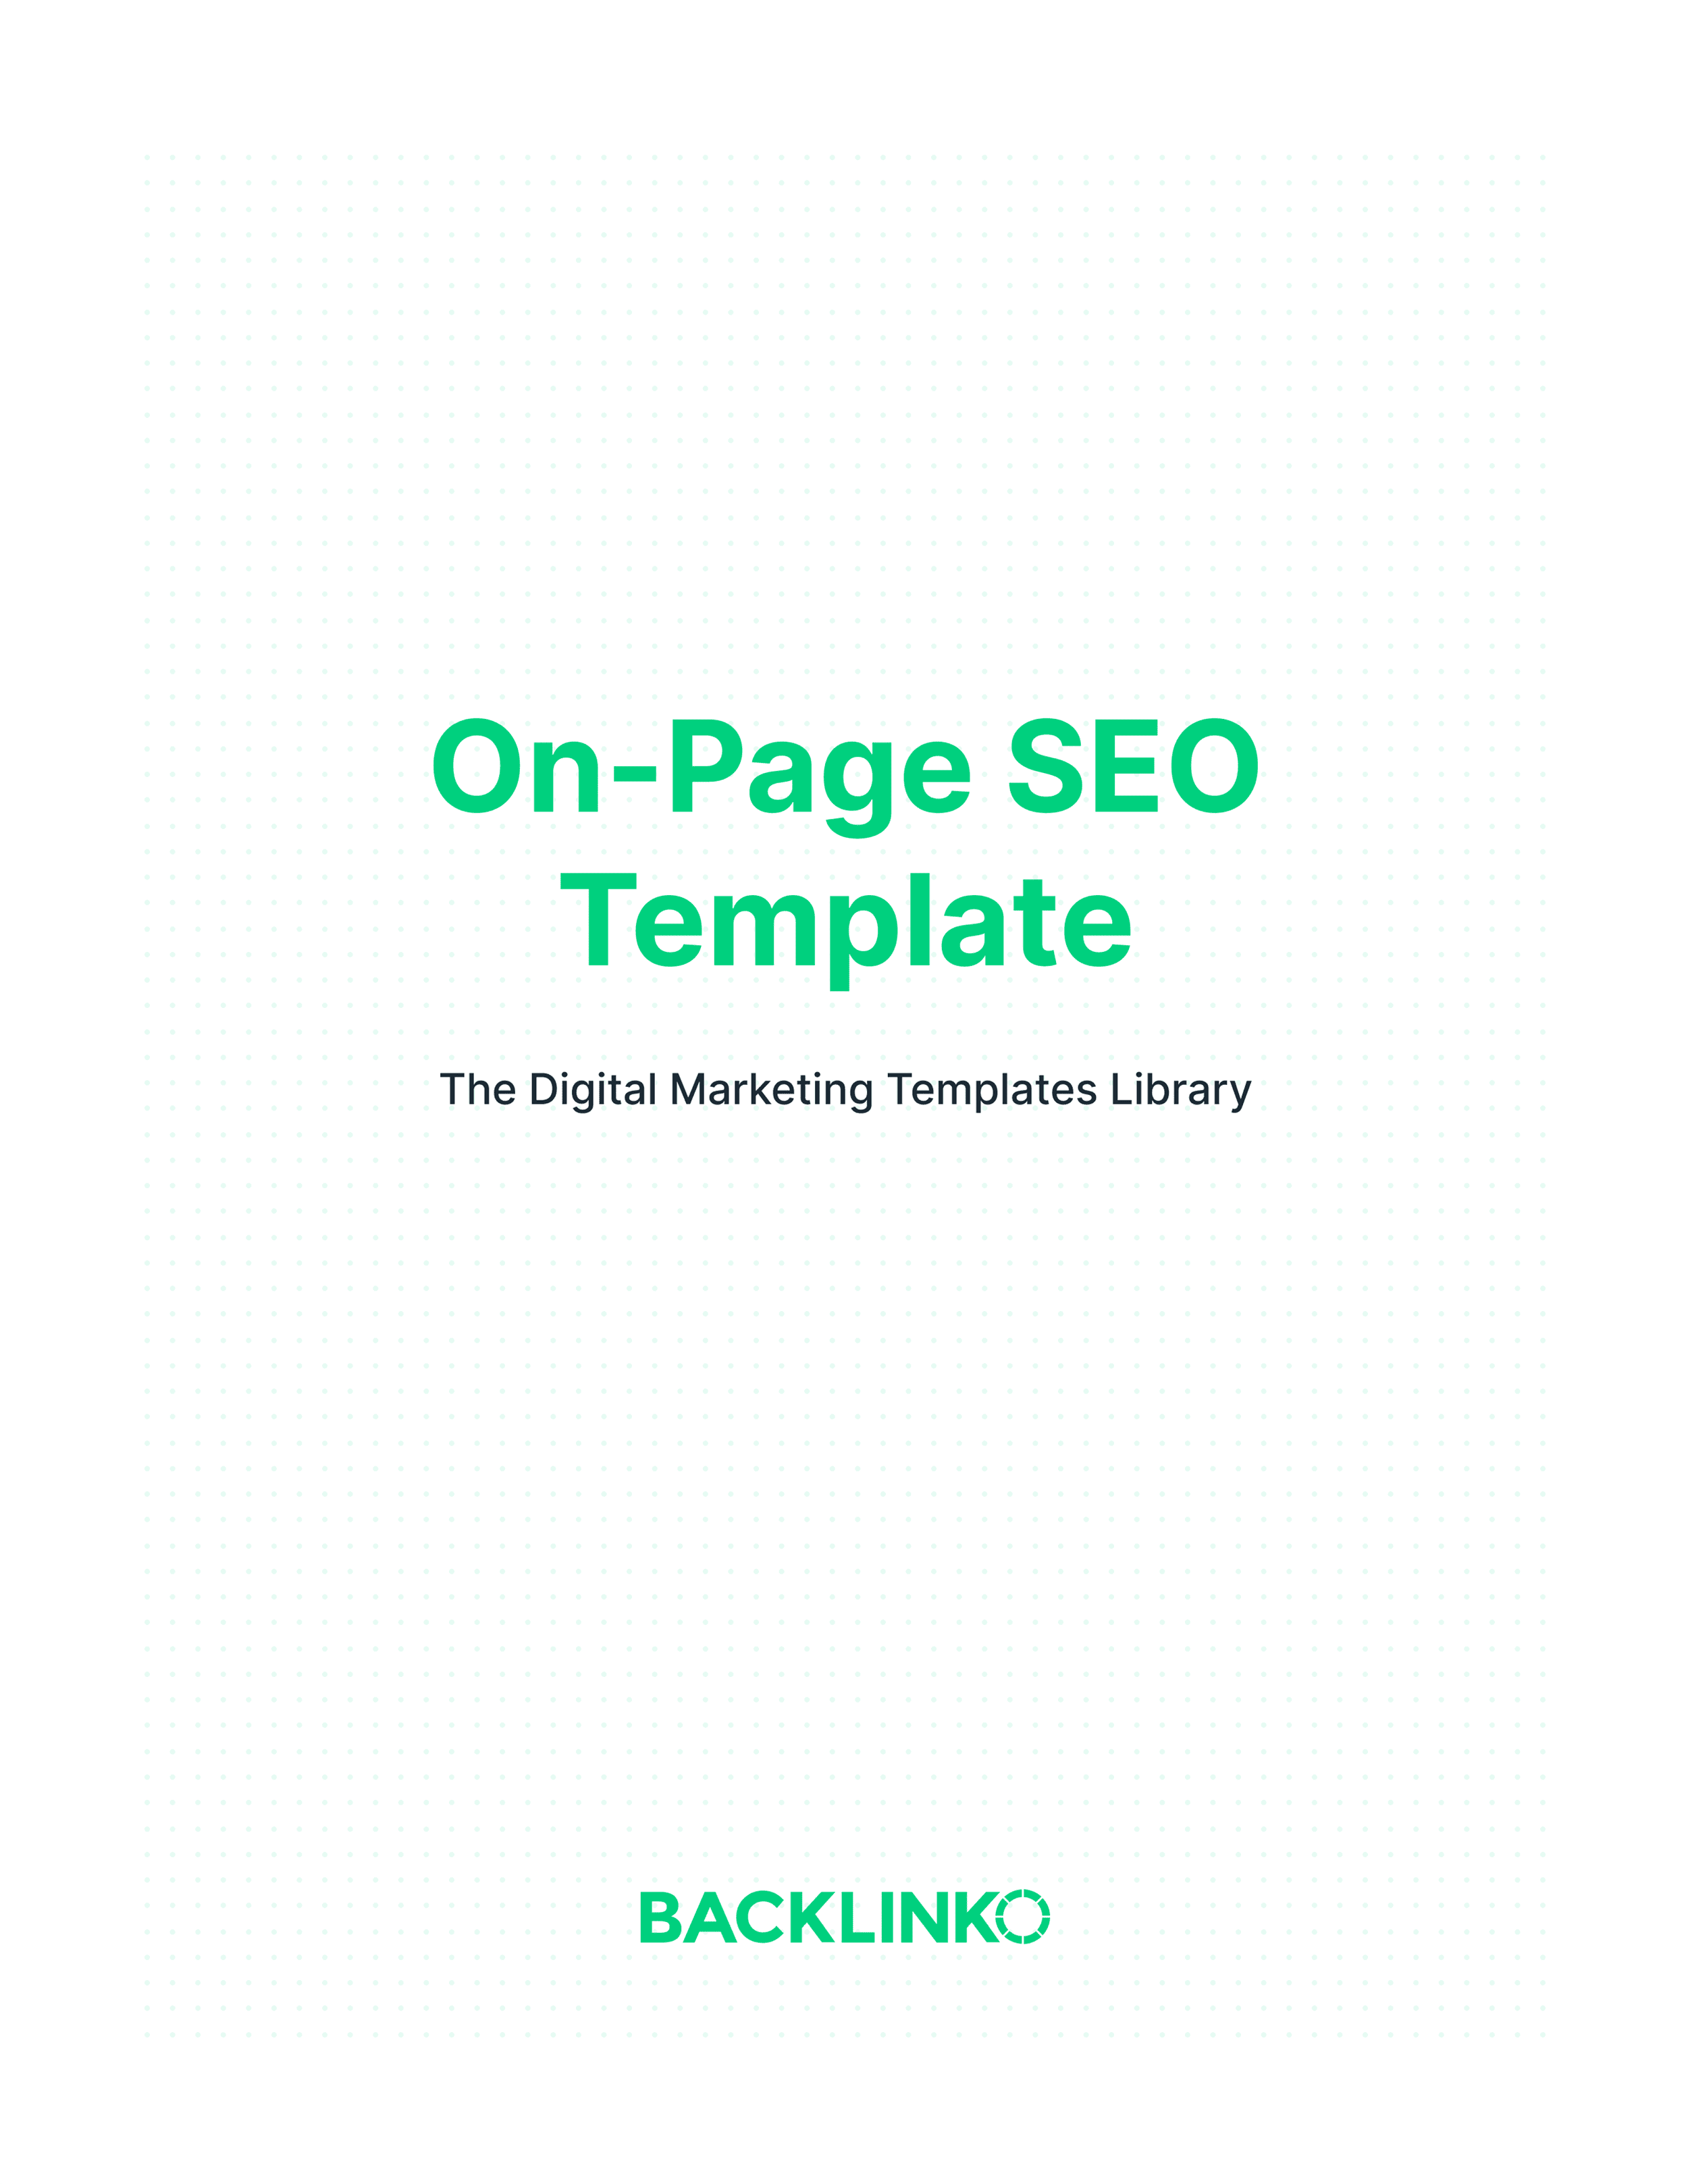 On-Page SEO Template